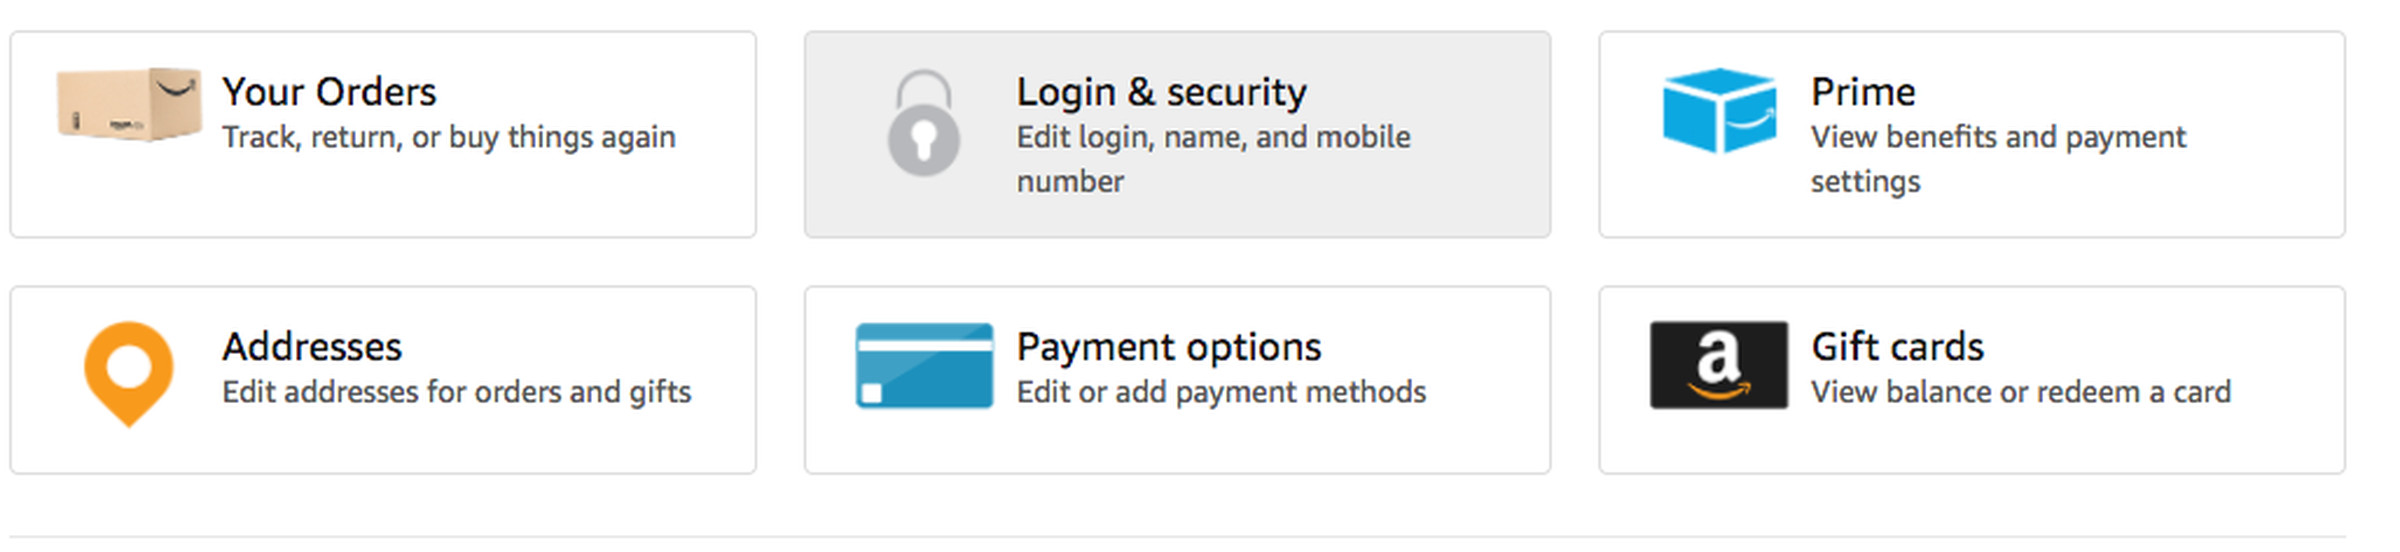 Start with Amazon’s “Login &amp; security” section.